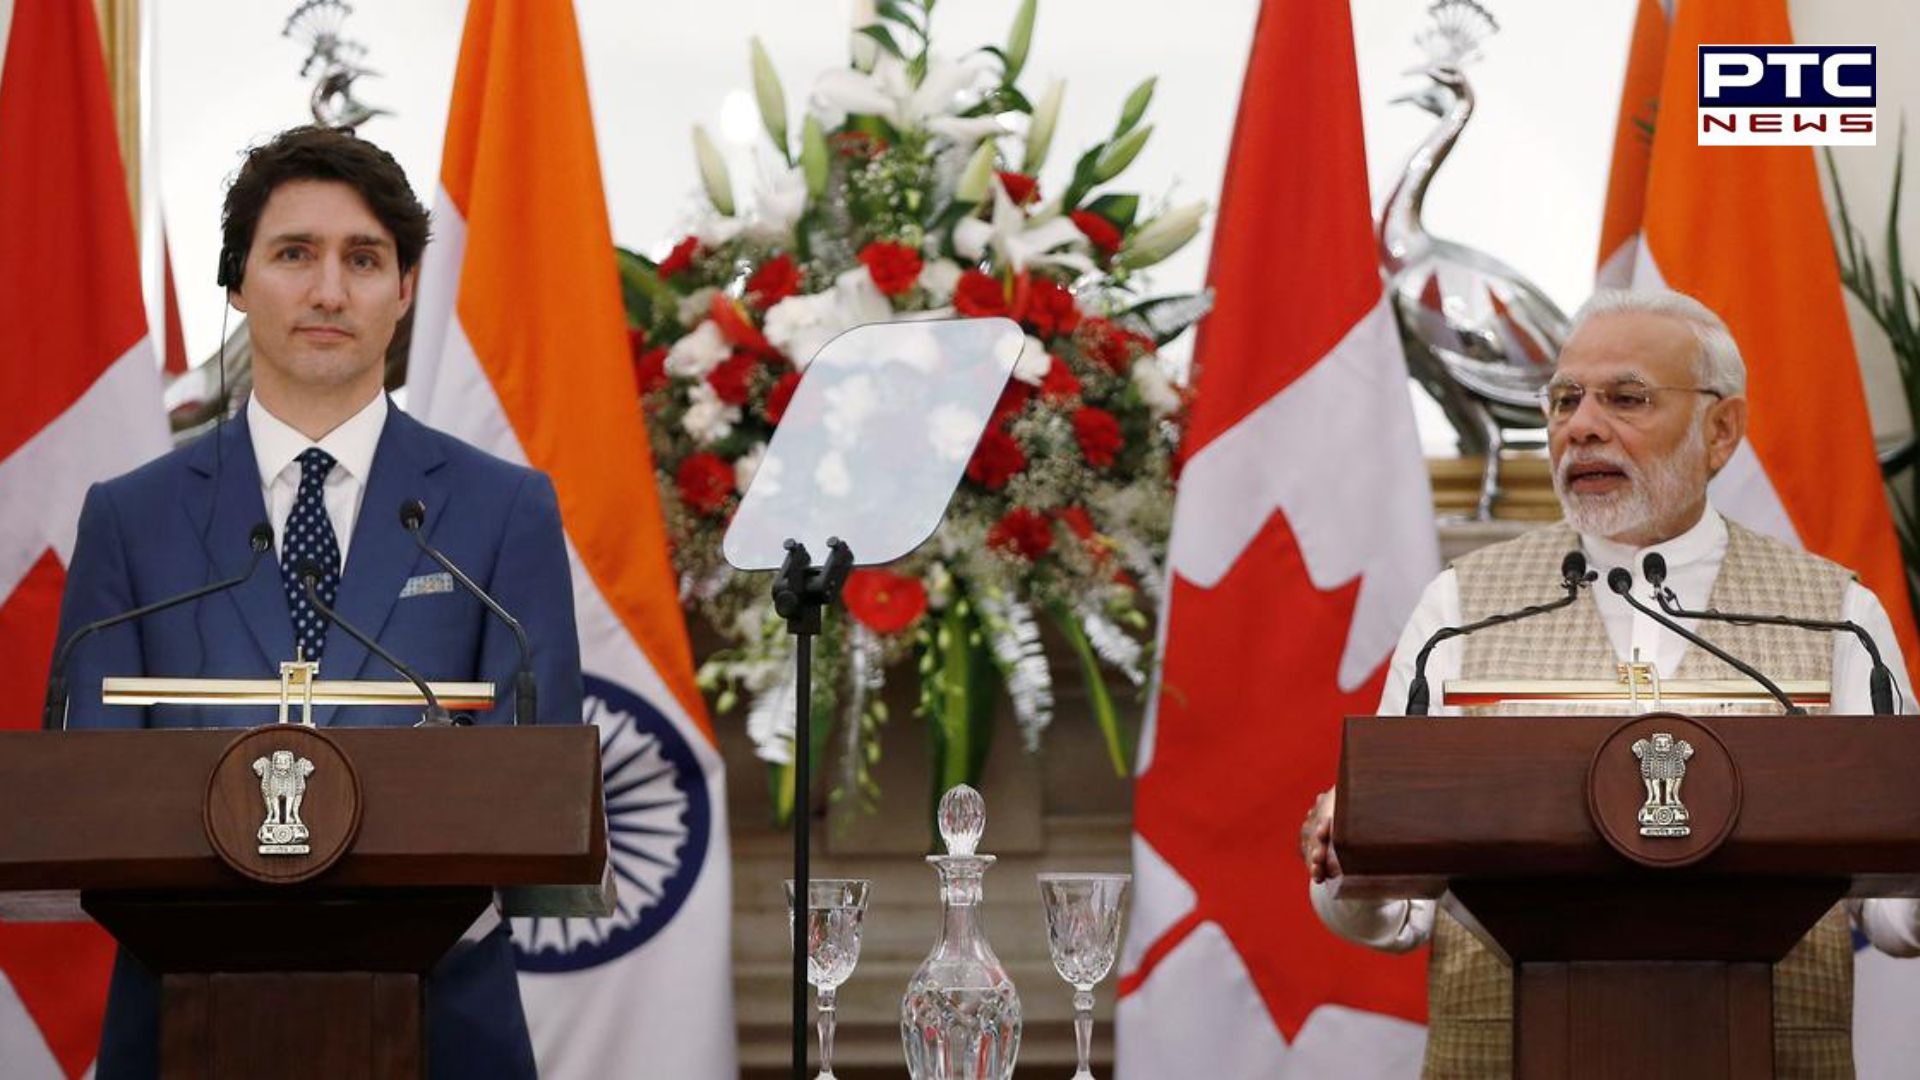 Canada accuses India and Pakistan of election interference